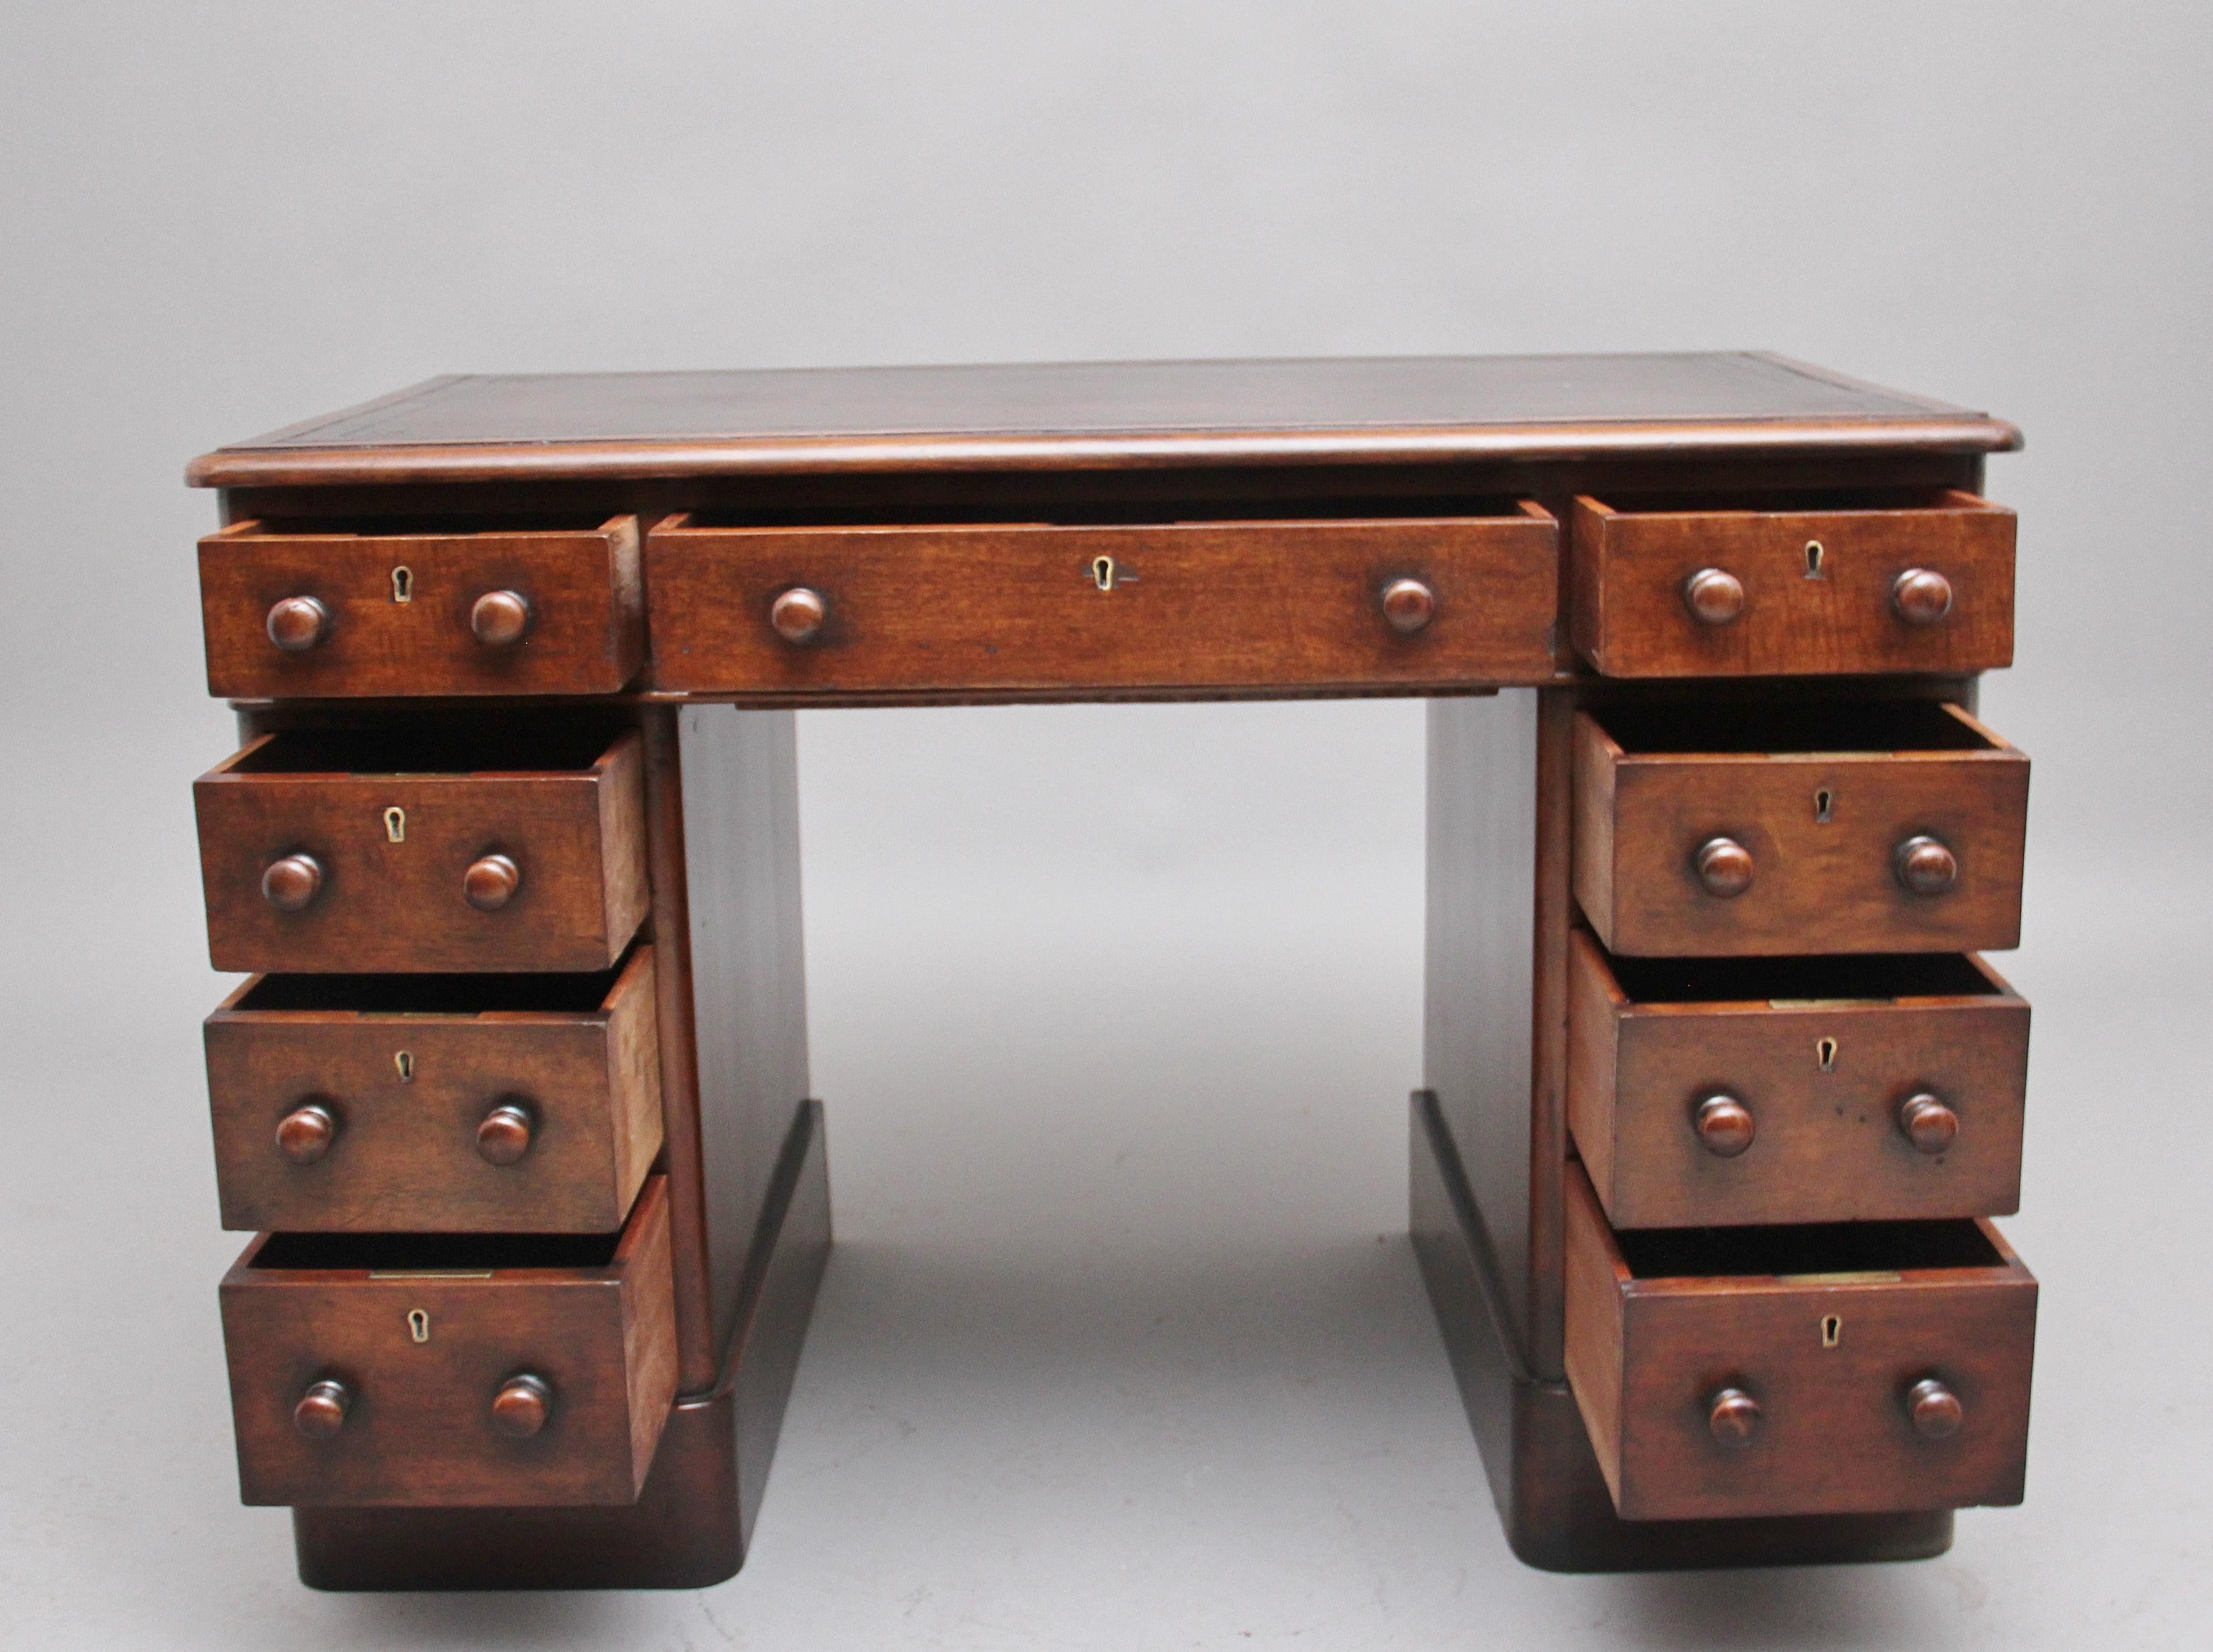 Early 19th century mahogany pedestal desk, the moulded edge top having a brown leather writing surface decorated with gold and blind tooling, the desk has an arrangement of nine graduated mahogany lined drawers with the original turned wooden knob